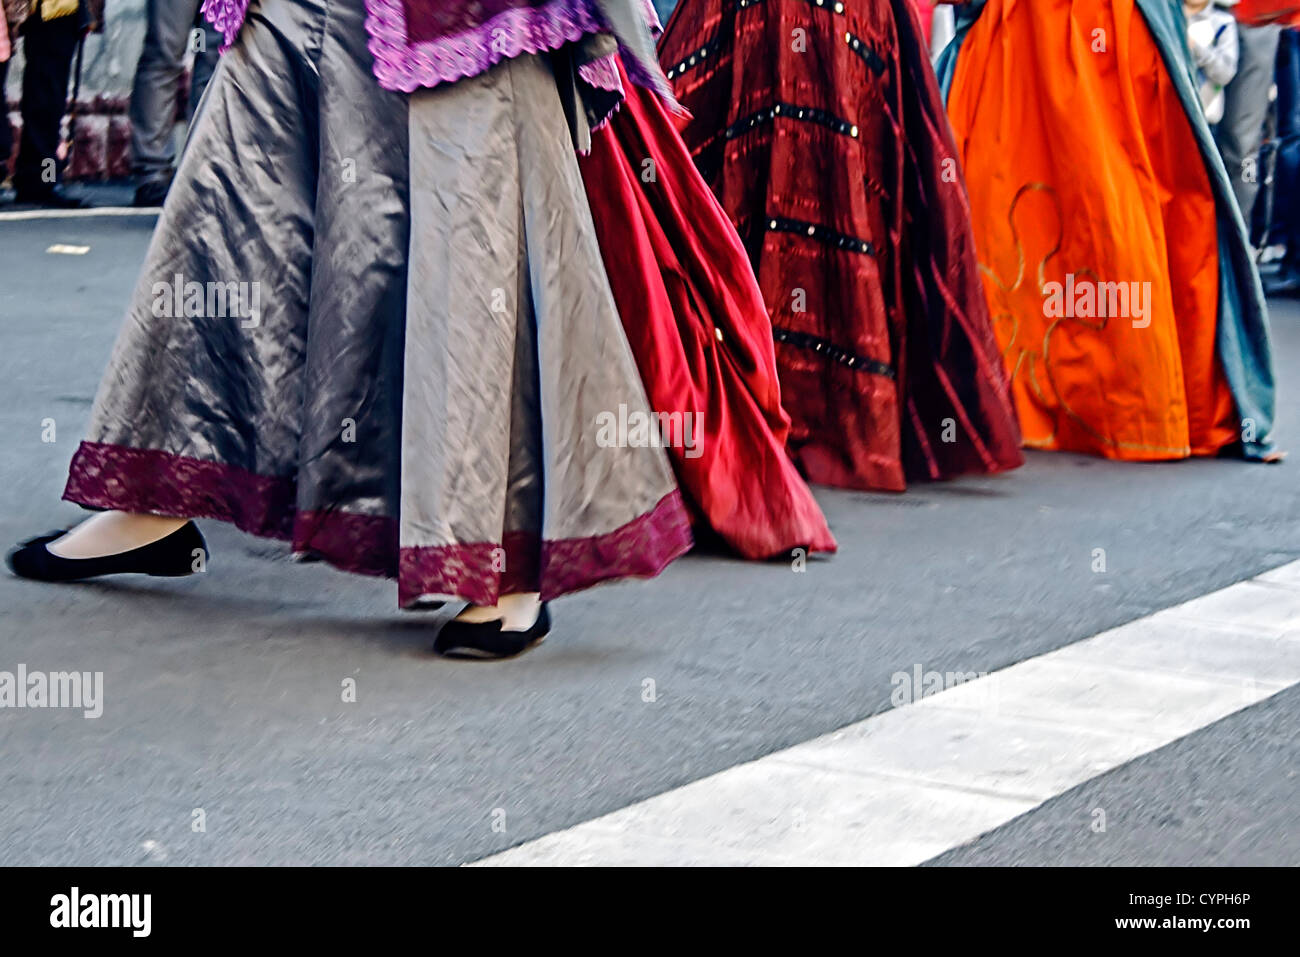 Minuet dance, performed by young people on the street, dressed in period costumes. Stock Photo